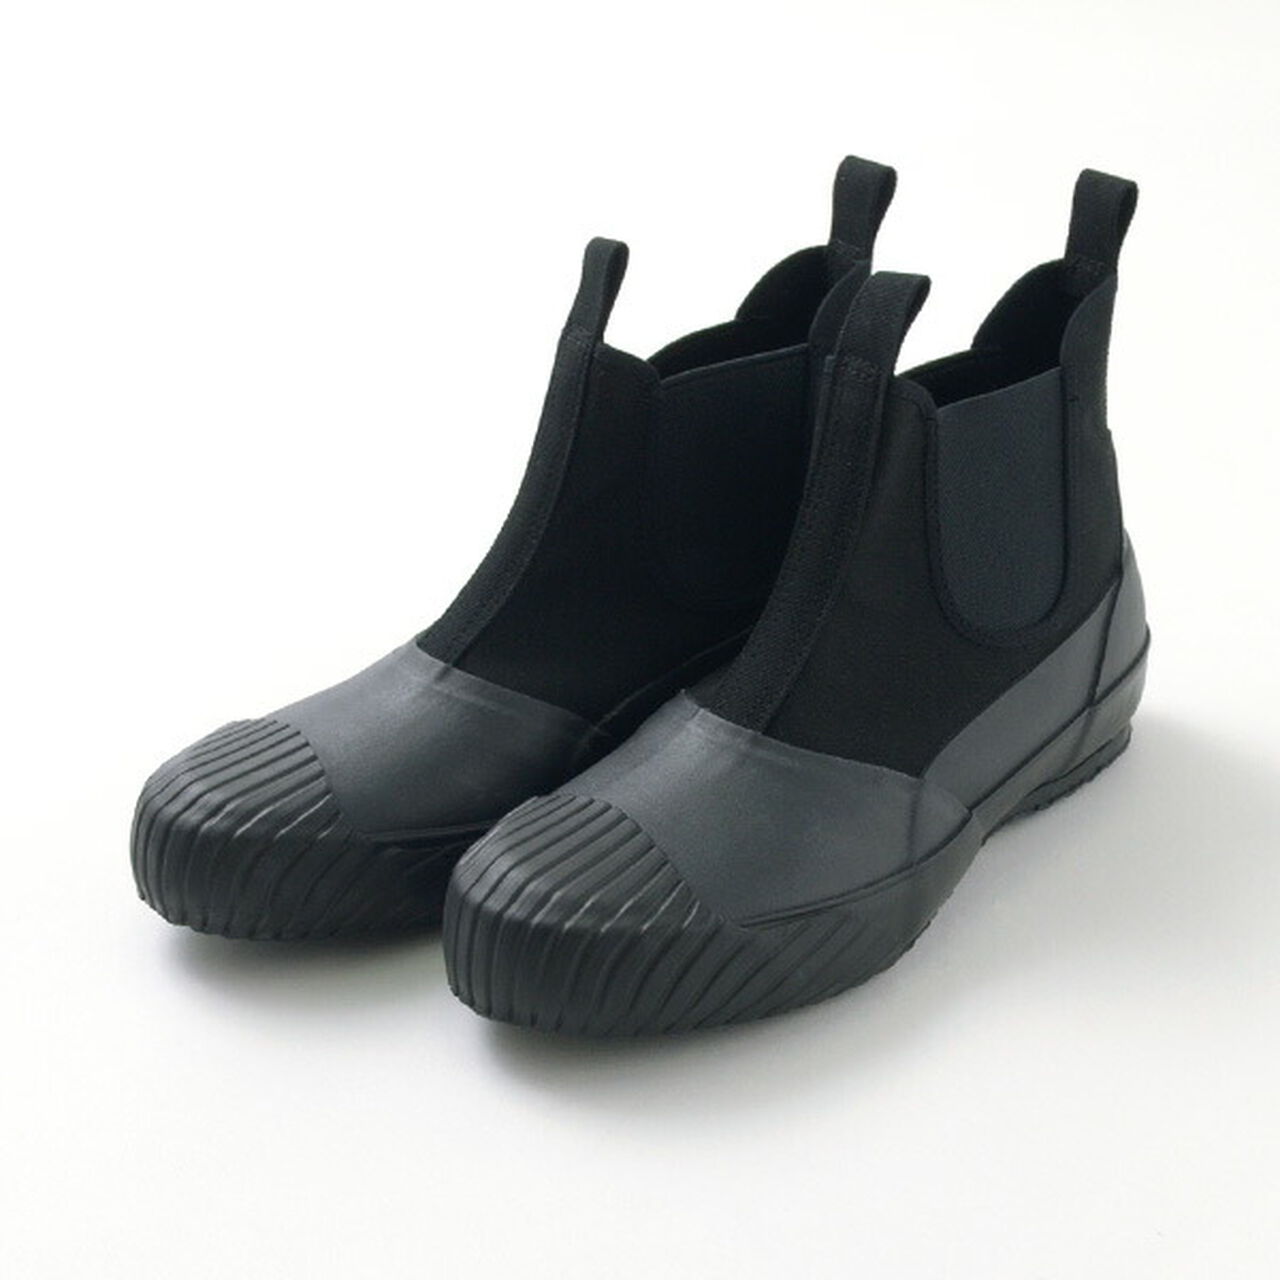 All Weather Side Gore Shoes,Black, large image number 0